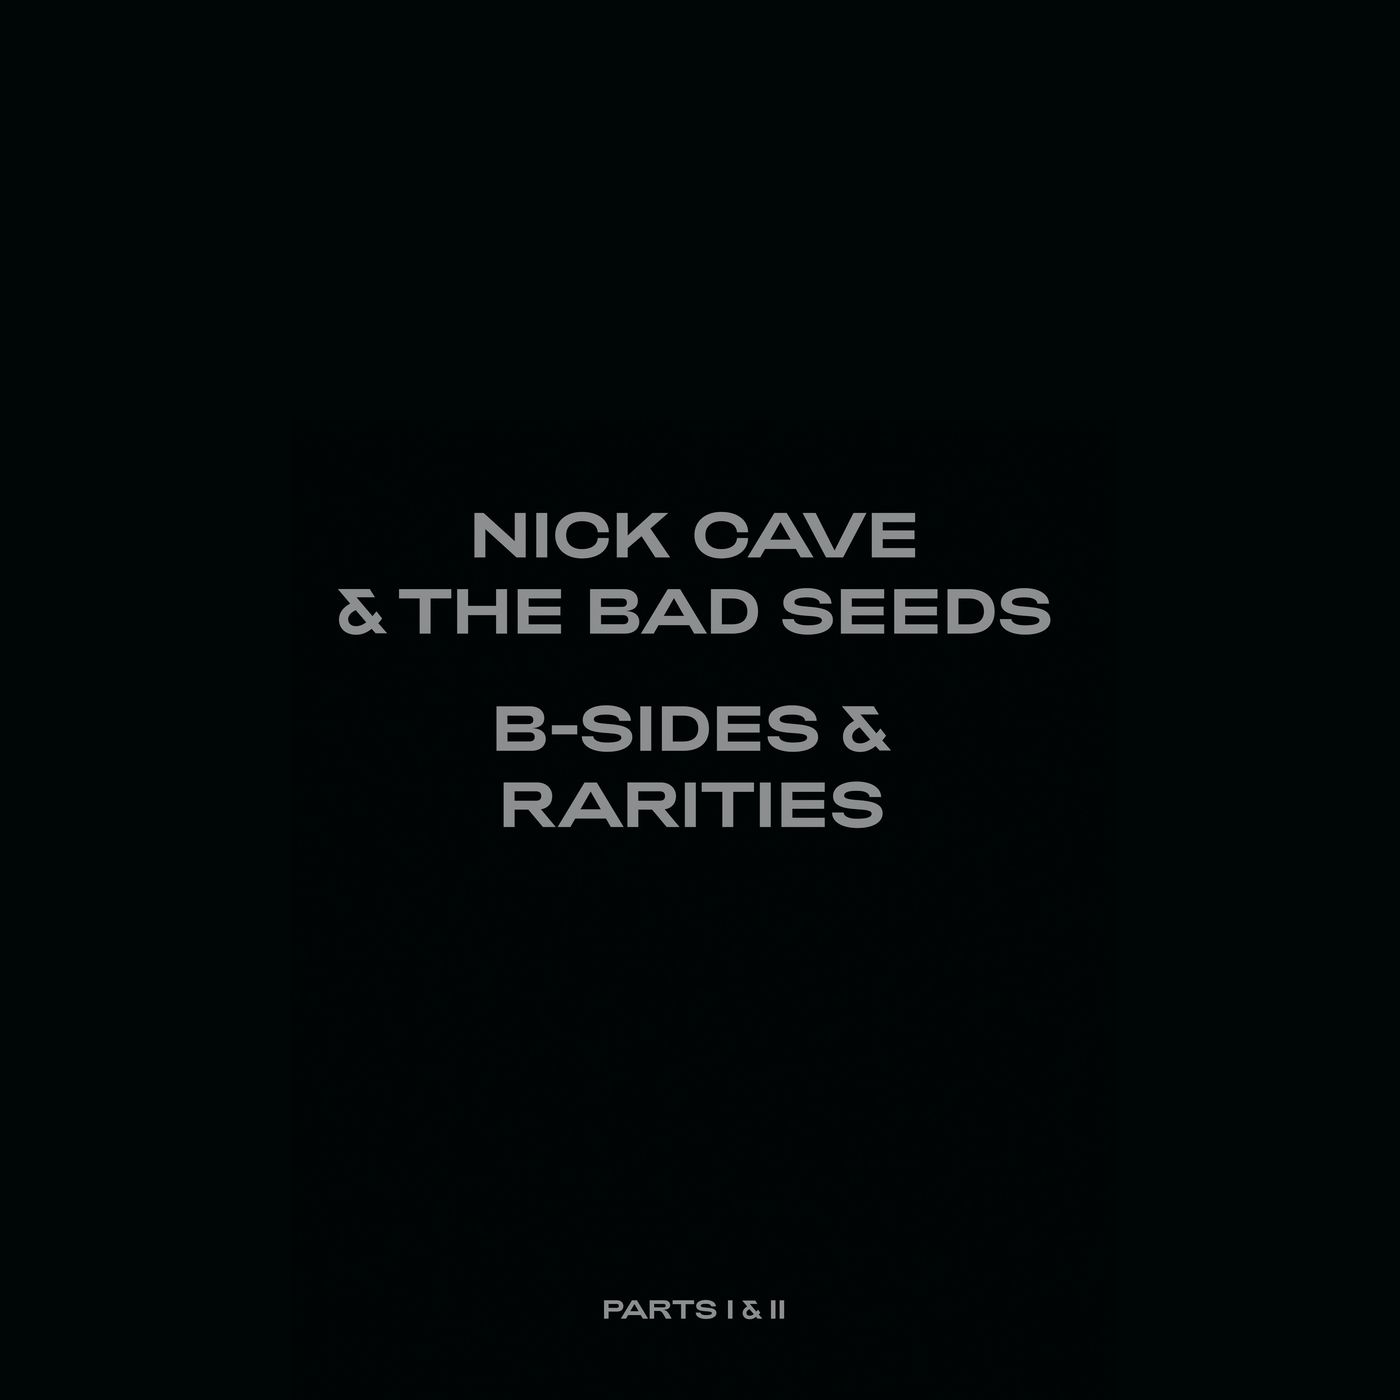 Nick Cave & The Bad Seeds B-SIDES & RARITIES - AND MORE (RADIO SHOW)